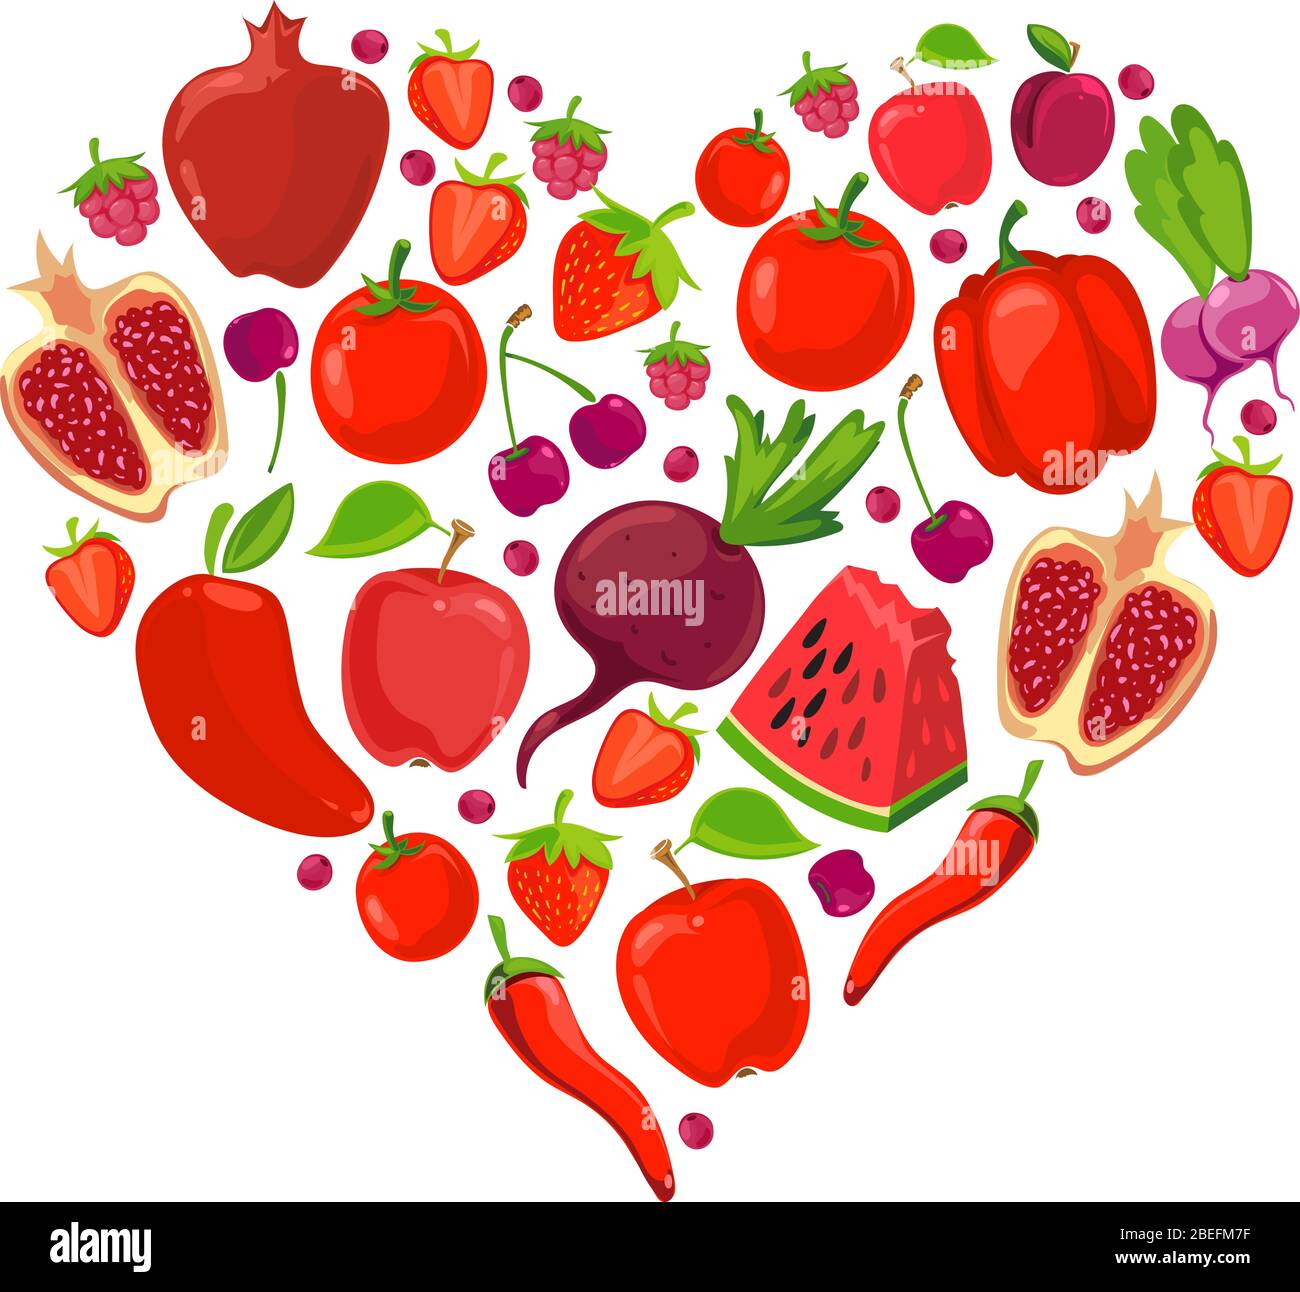 Heart shape of red fruits and vegetables. Healthy nutrition organic vector illustration Stock Vector